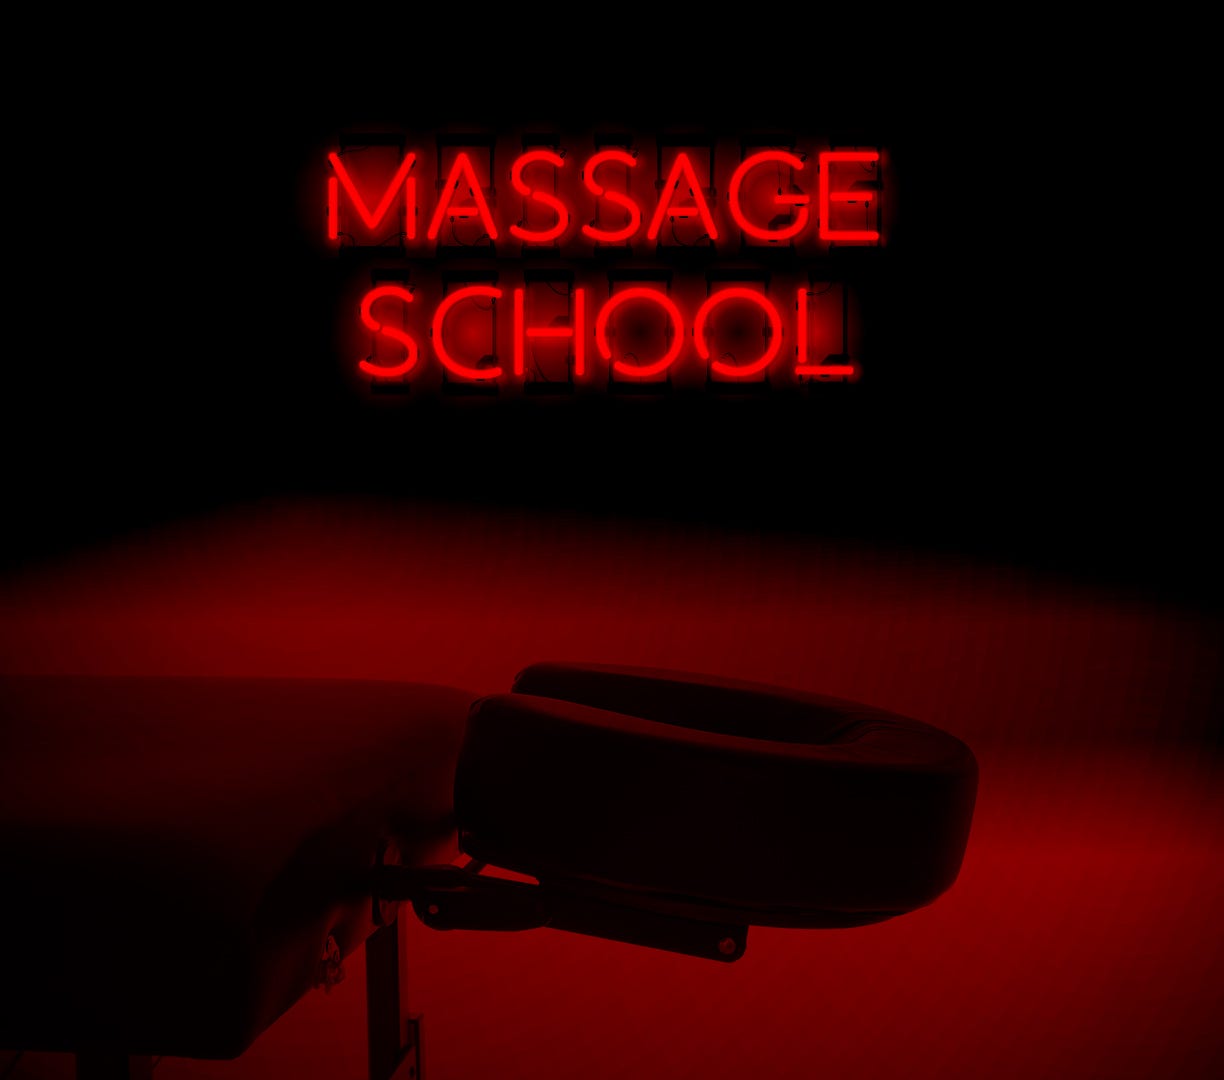 Massage schools linked to prostitution, fraud remain open across US pic